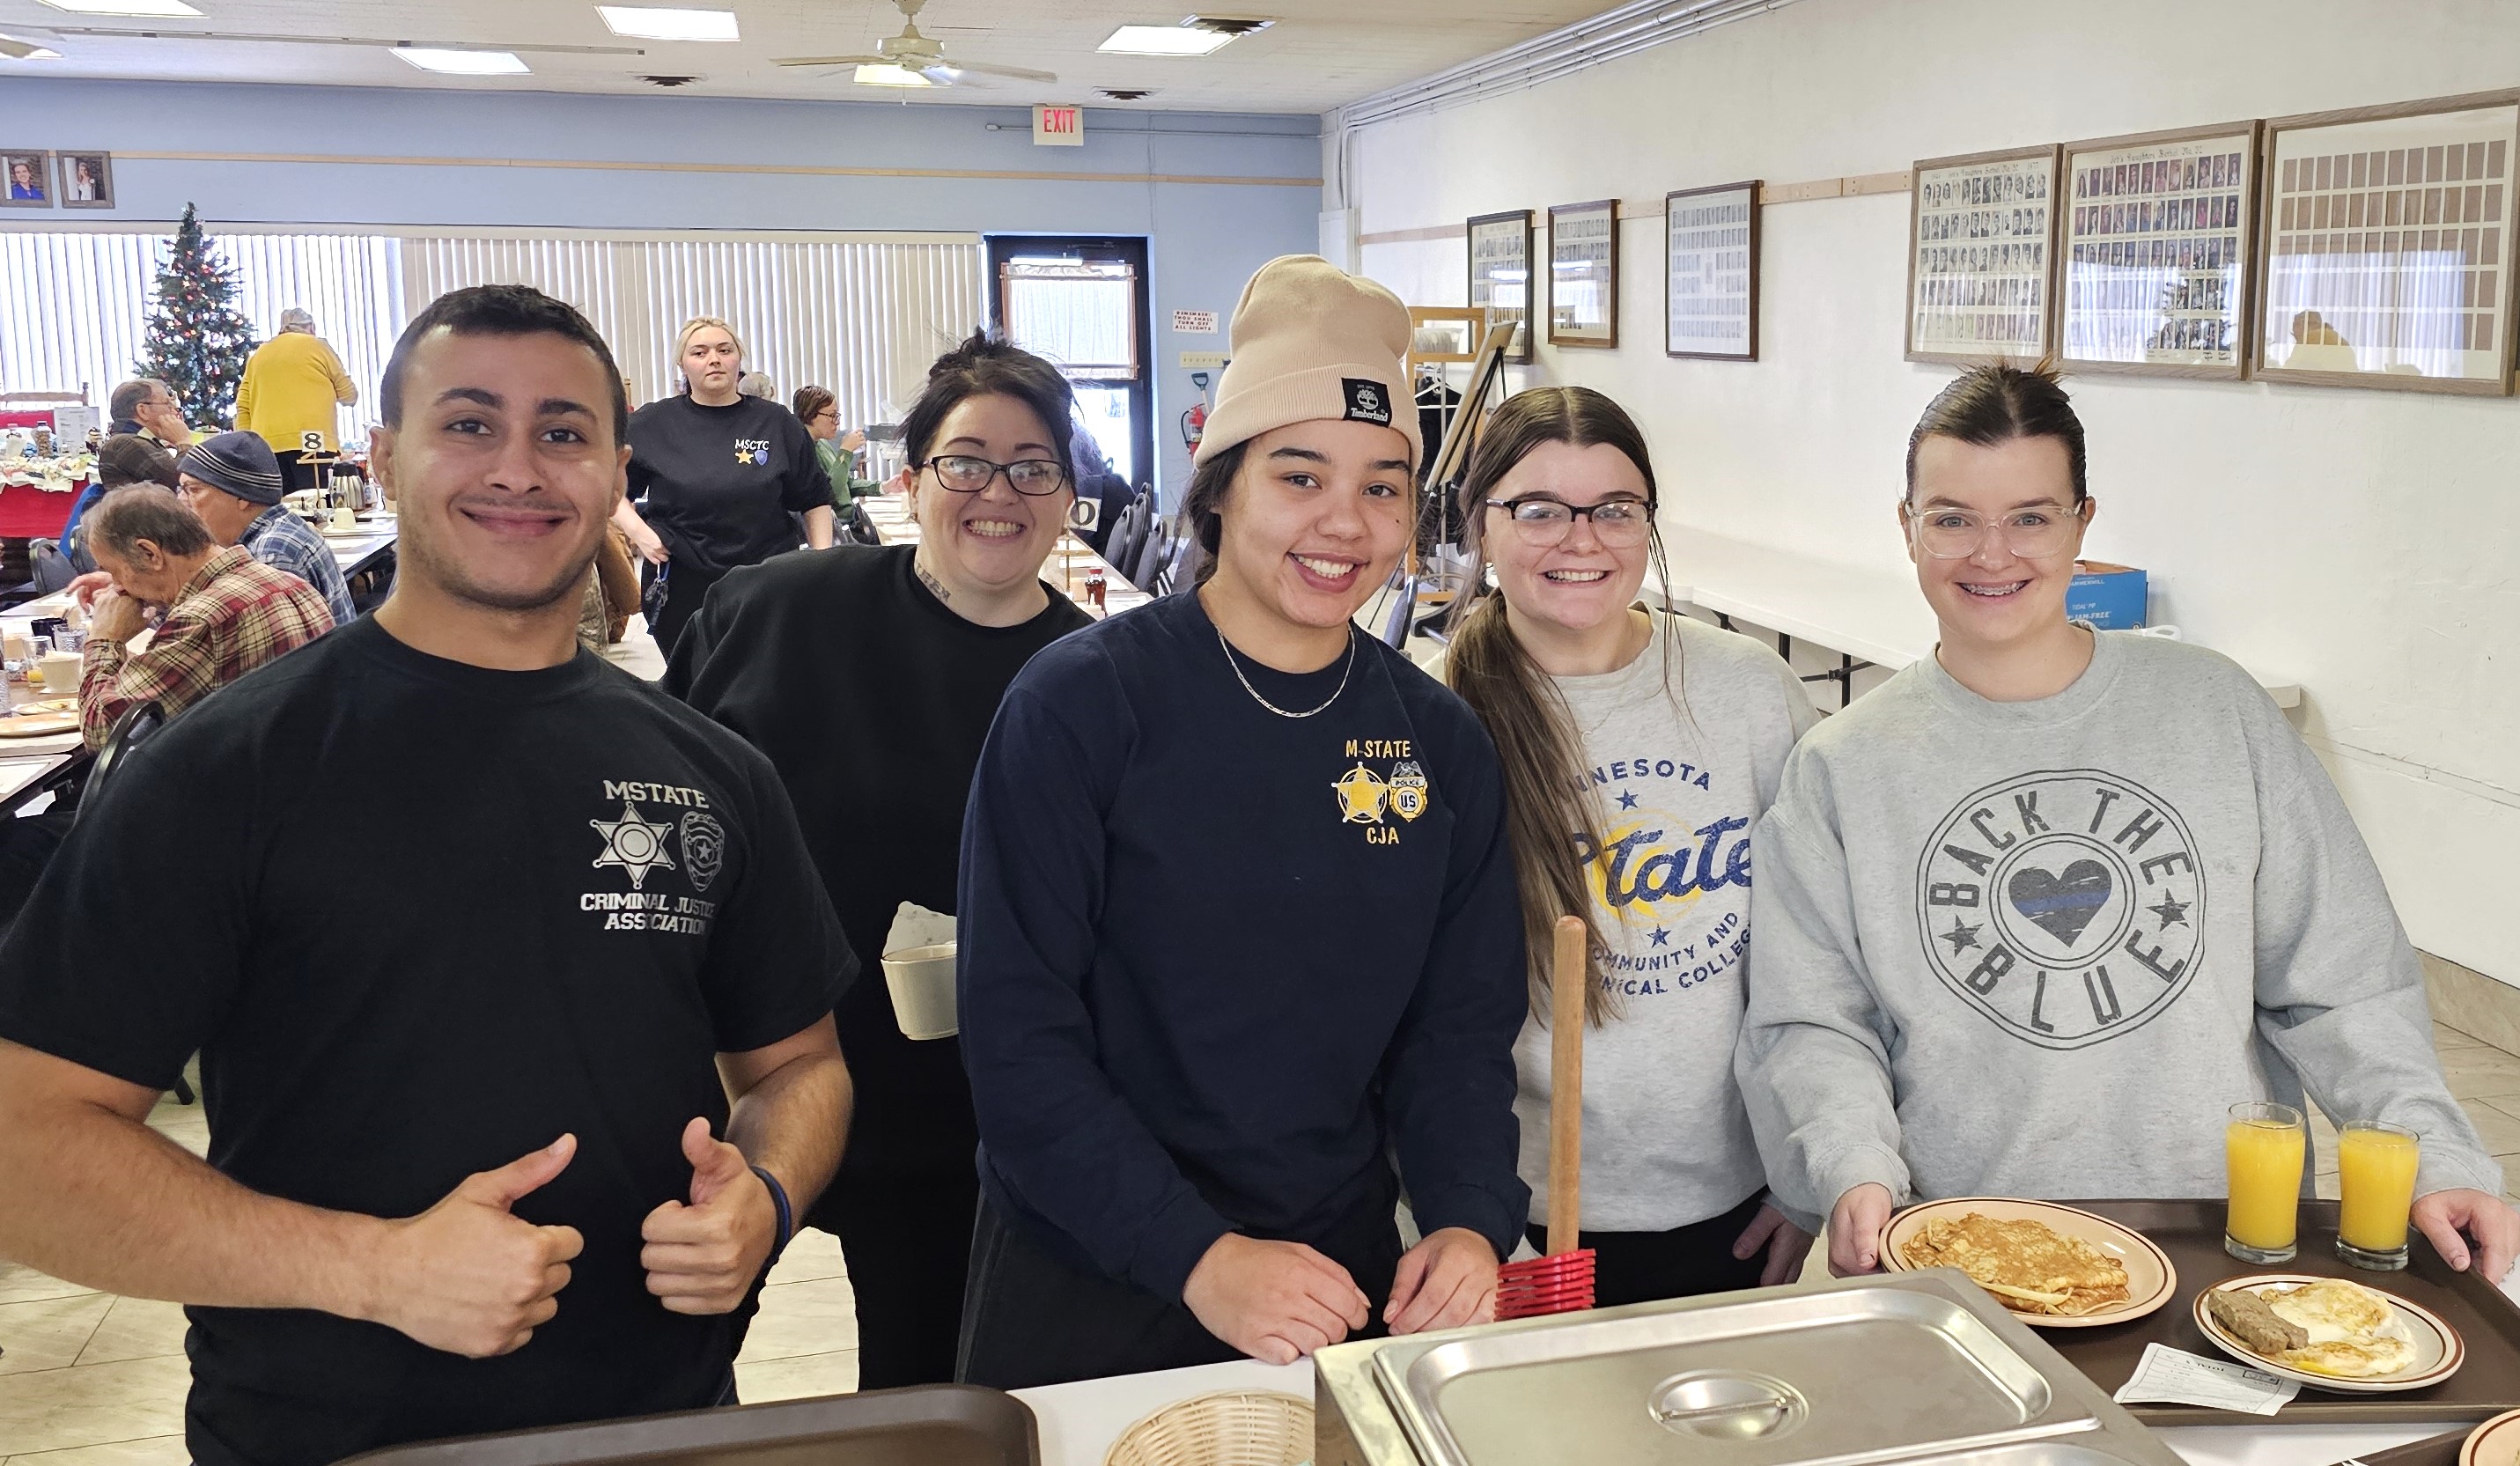 M State Criminal Justice students Binyad Brifki, Lacey Tesla, Sasha Dua, Tristan Altepeter and Lydia Moore, left to right, foreground, and Lily Tesla, walking in the background, serve meals at one of the Moorhead Masonic Lodge’s weekly Pancake Breakfasts this past winter. The college’s Criminal Justice program has partnered with the Masonic Family to provide the breakfasts for the past eight years.